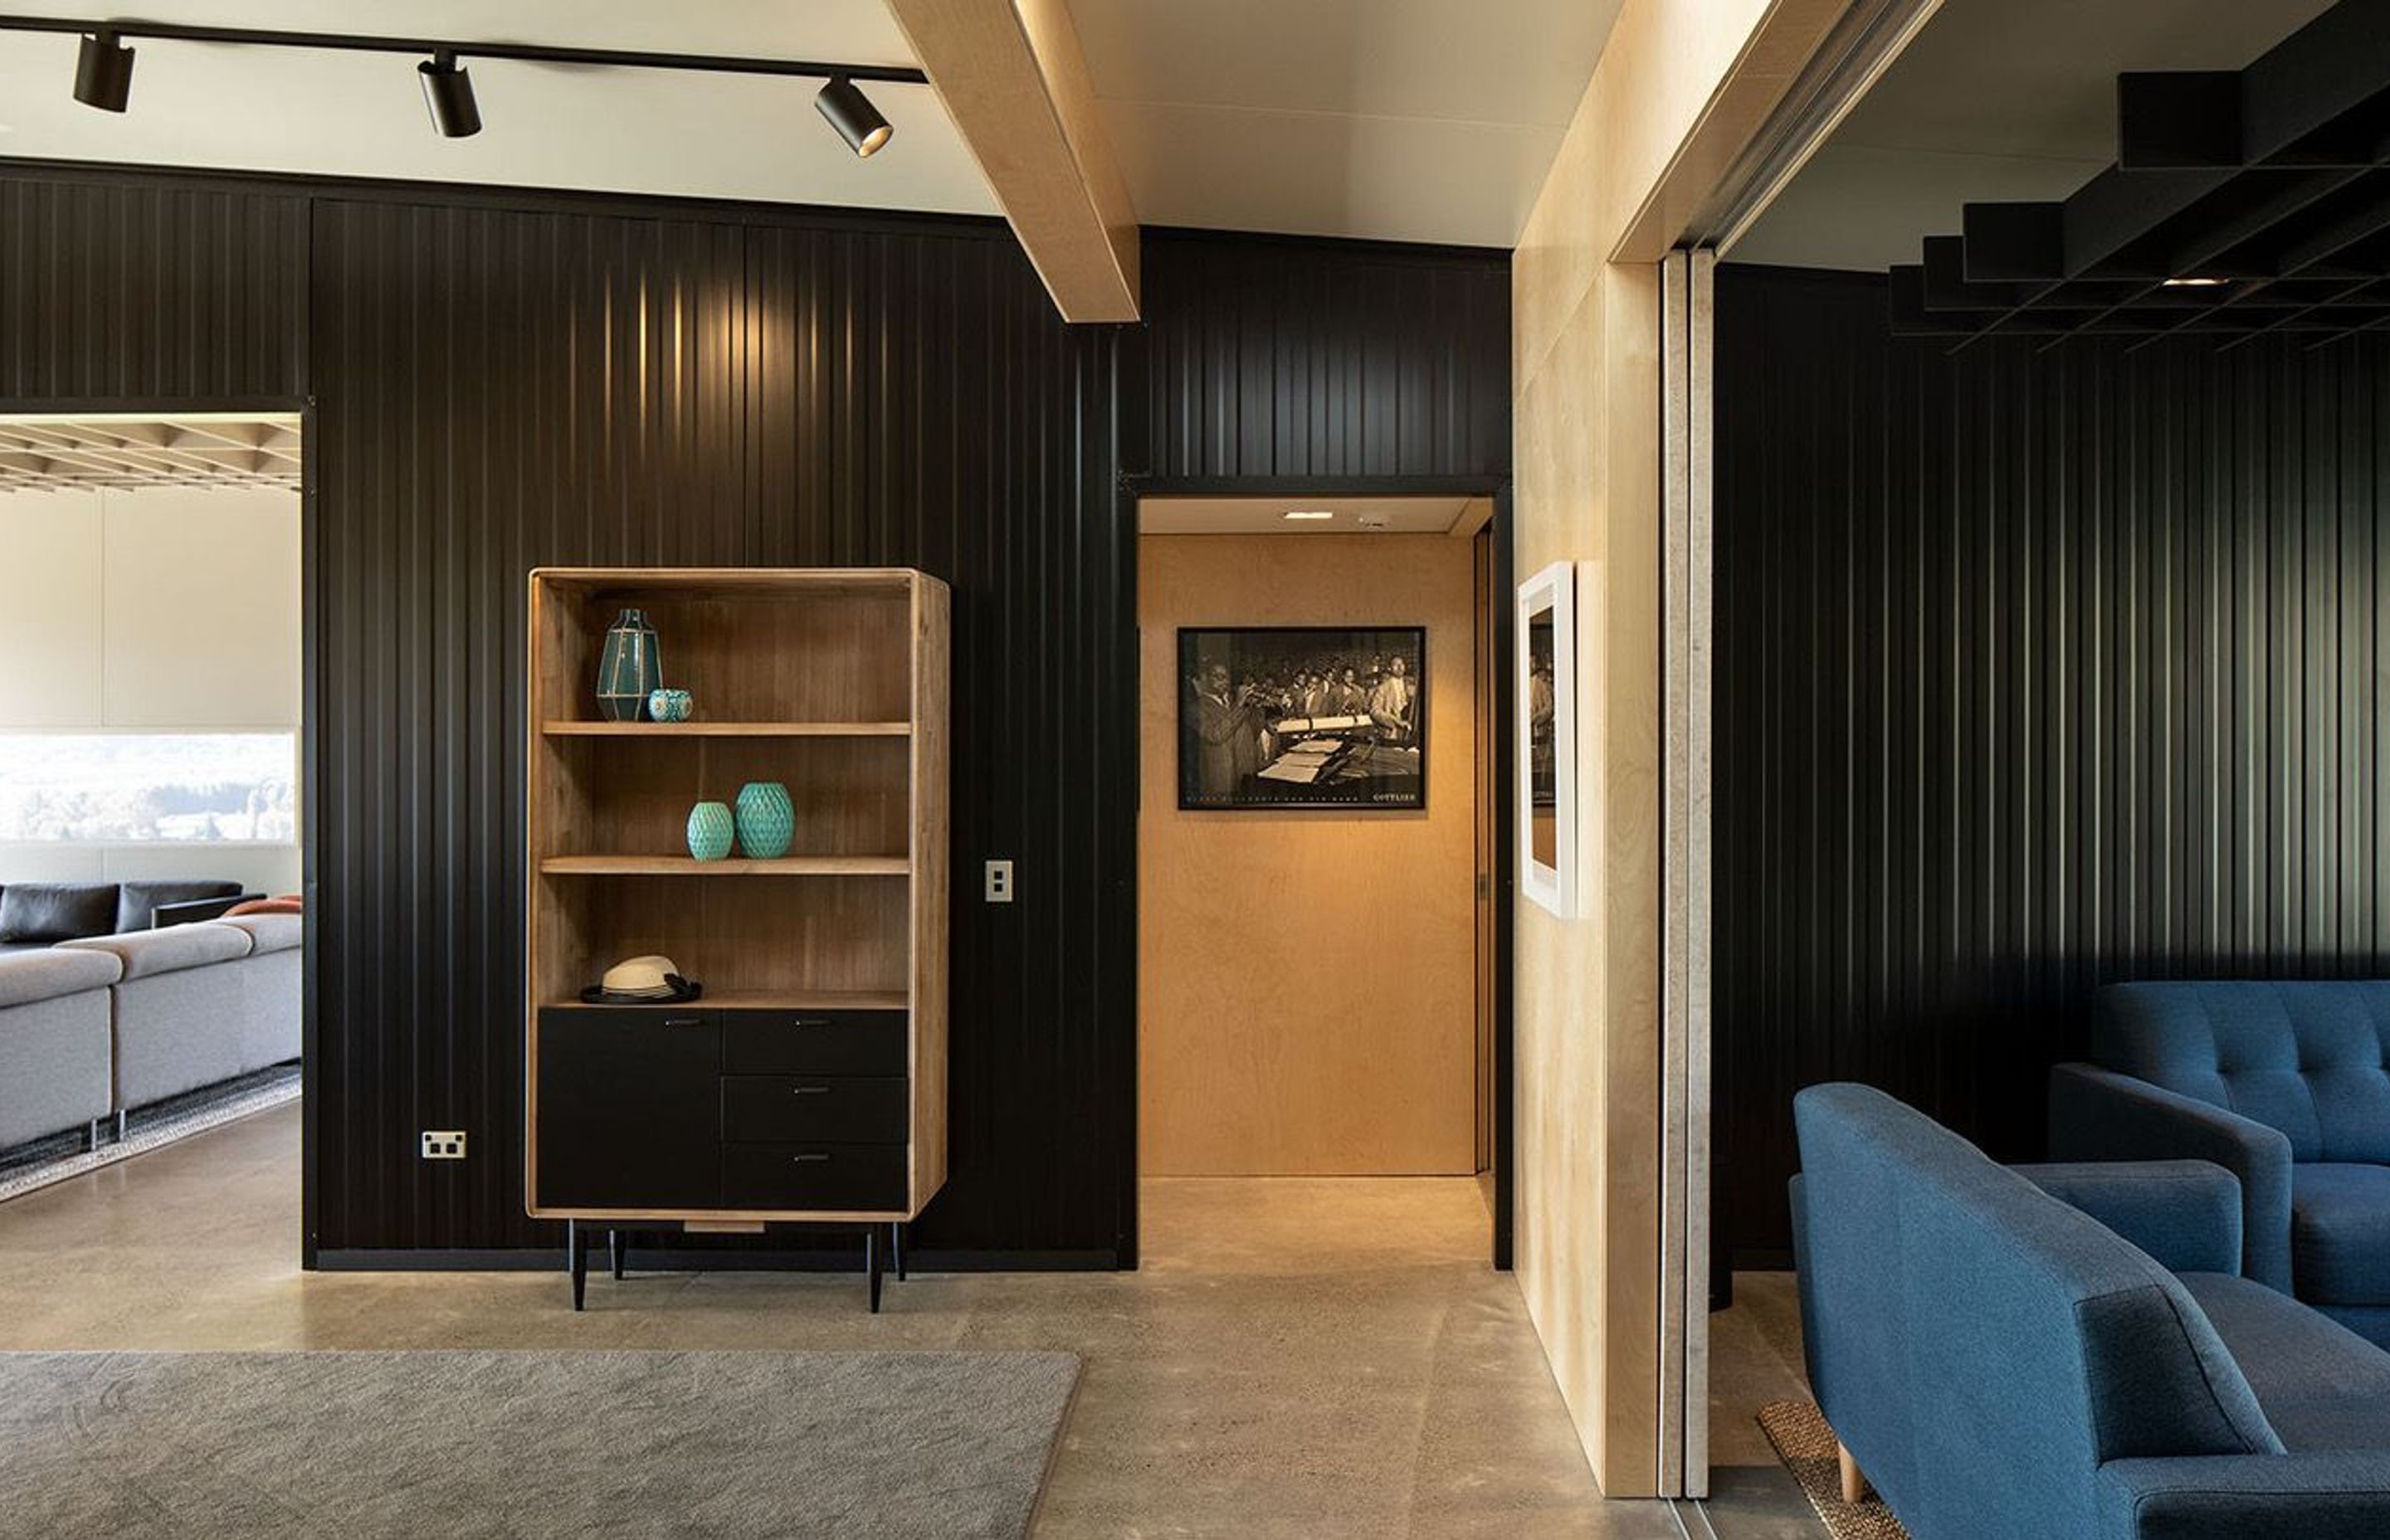 Prefabricated Metalcraft panels are a key feature of the house, making up both the internal walls as well as the exterior cladding. Photograph: Simon Devitt.